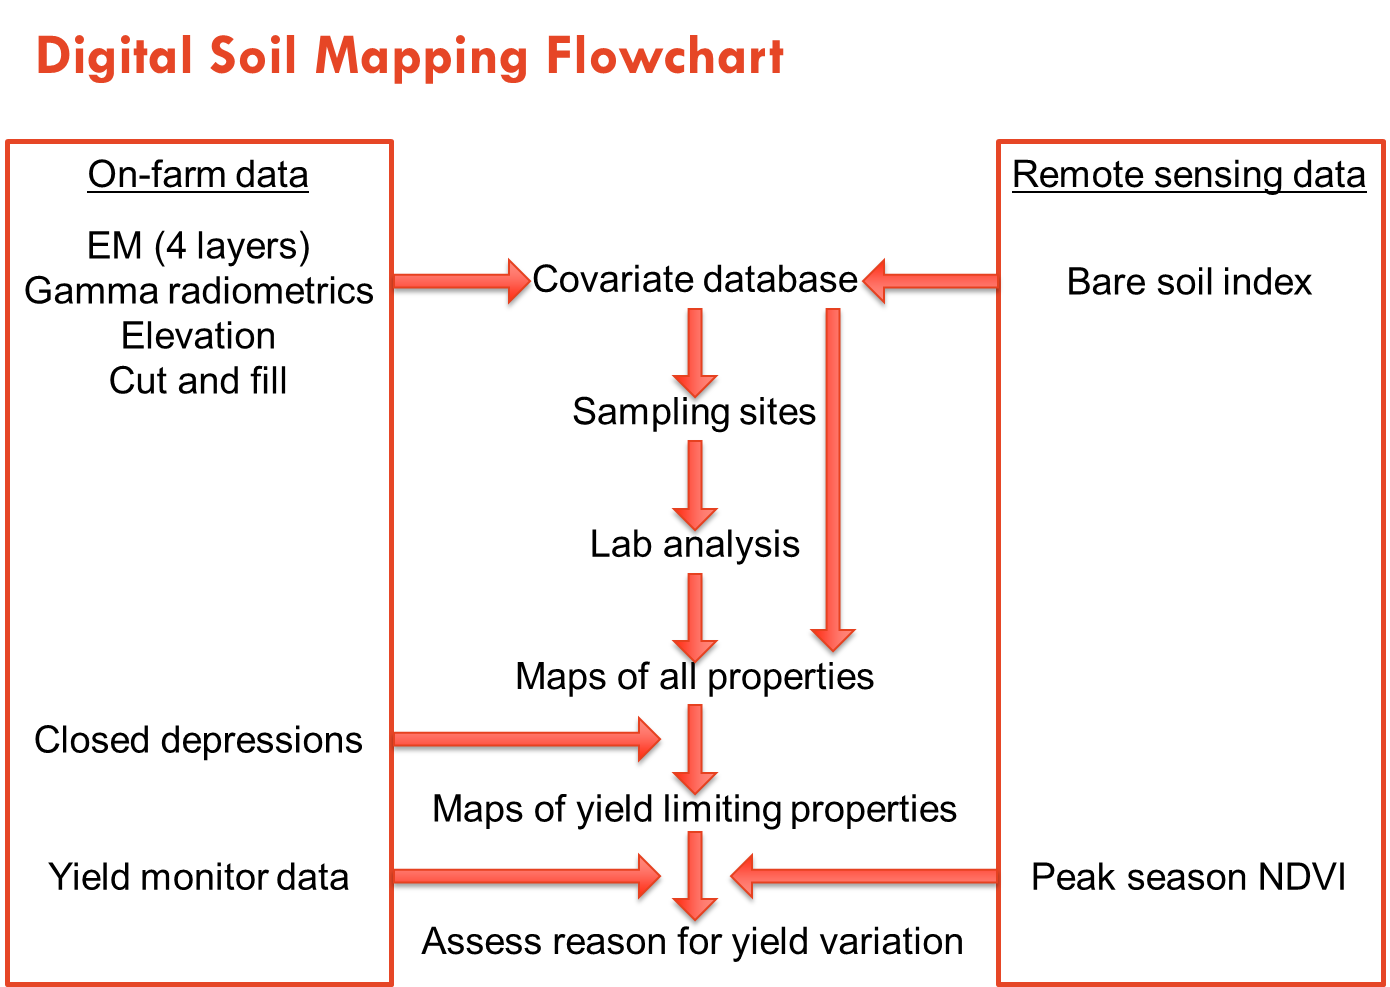 This flow chart illustrates the process used to assess soil reasons for yield variation using digital soil mapping